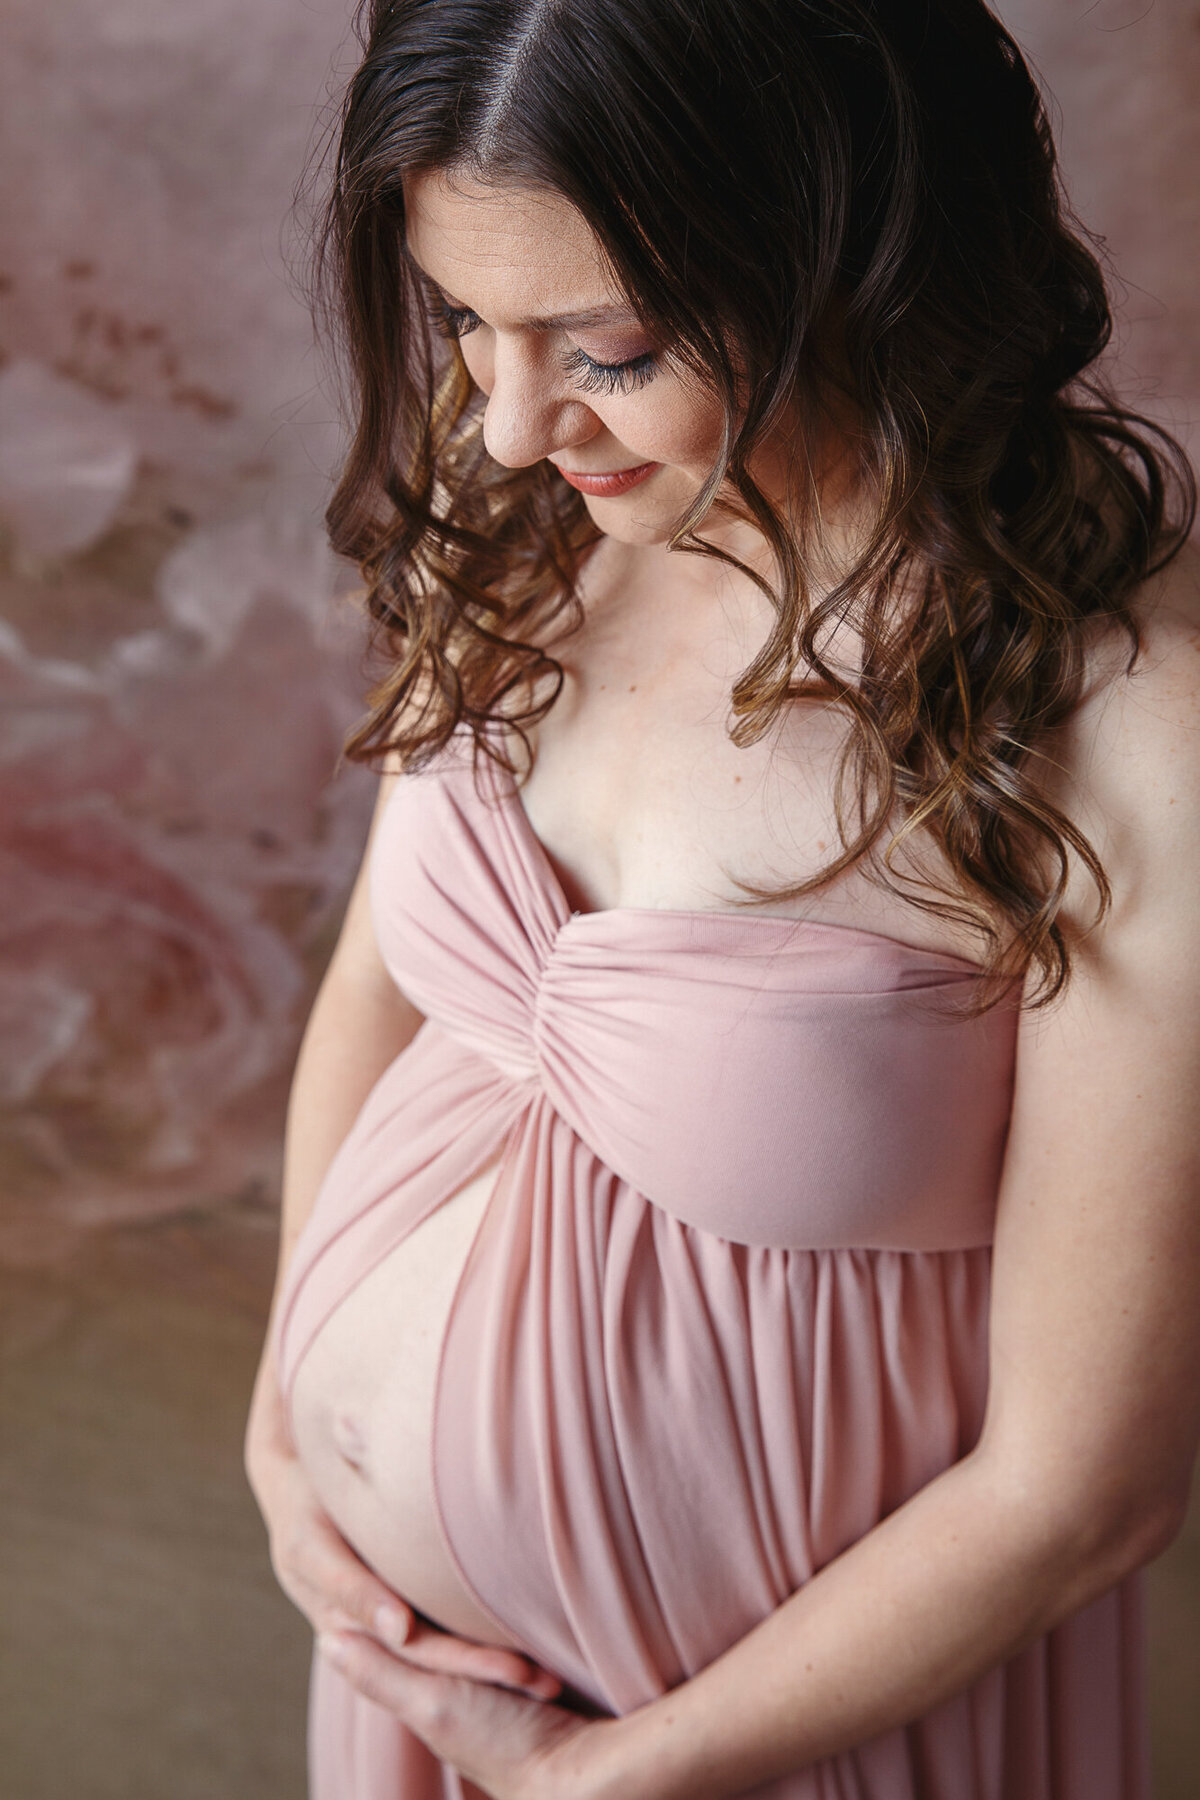 Beautiful pregnant woman looking down at her baby bump